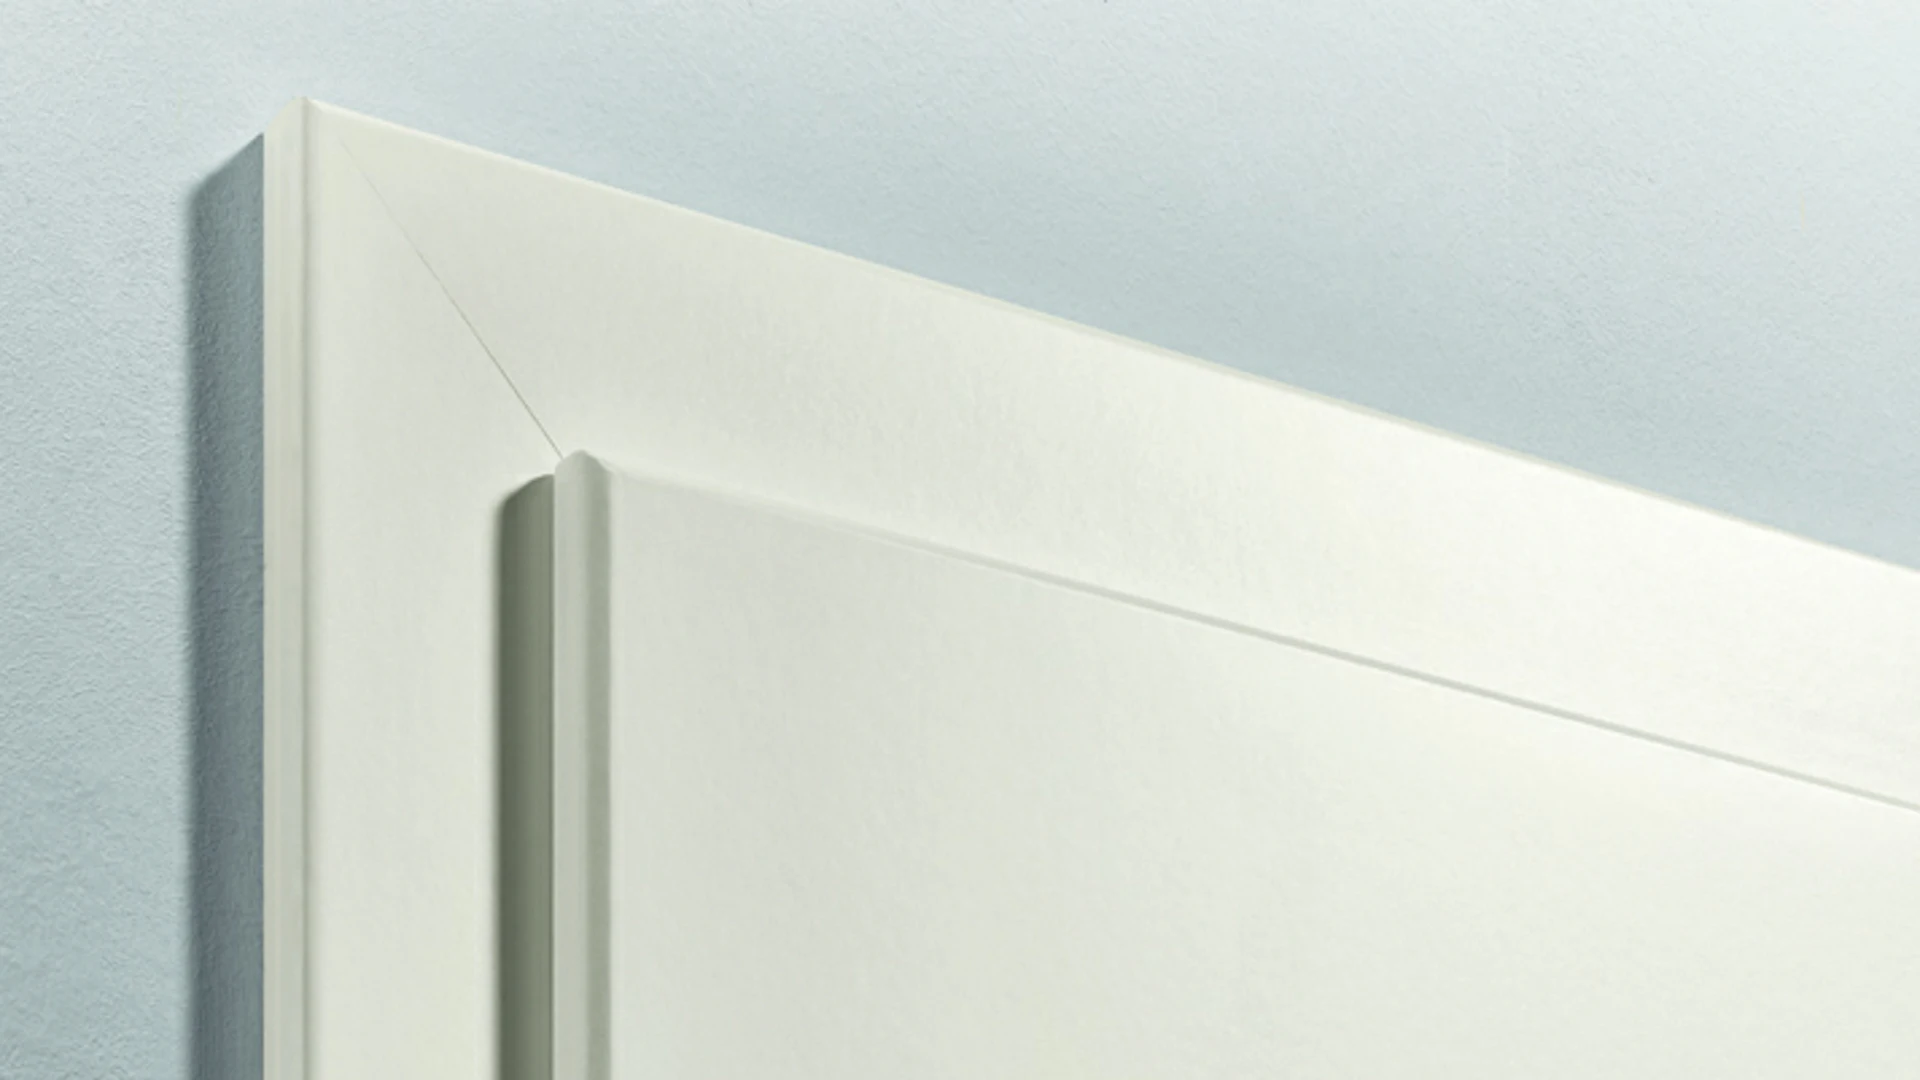 planeo standard frame round edge - white lacquer 9010 - 1985mm